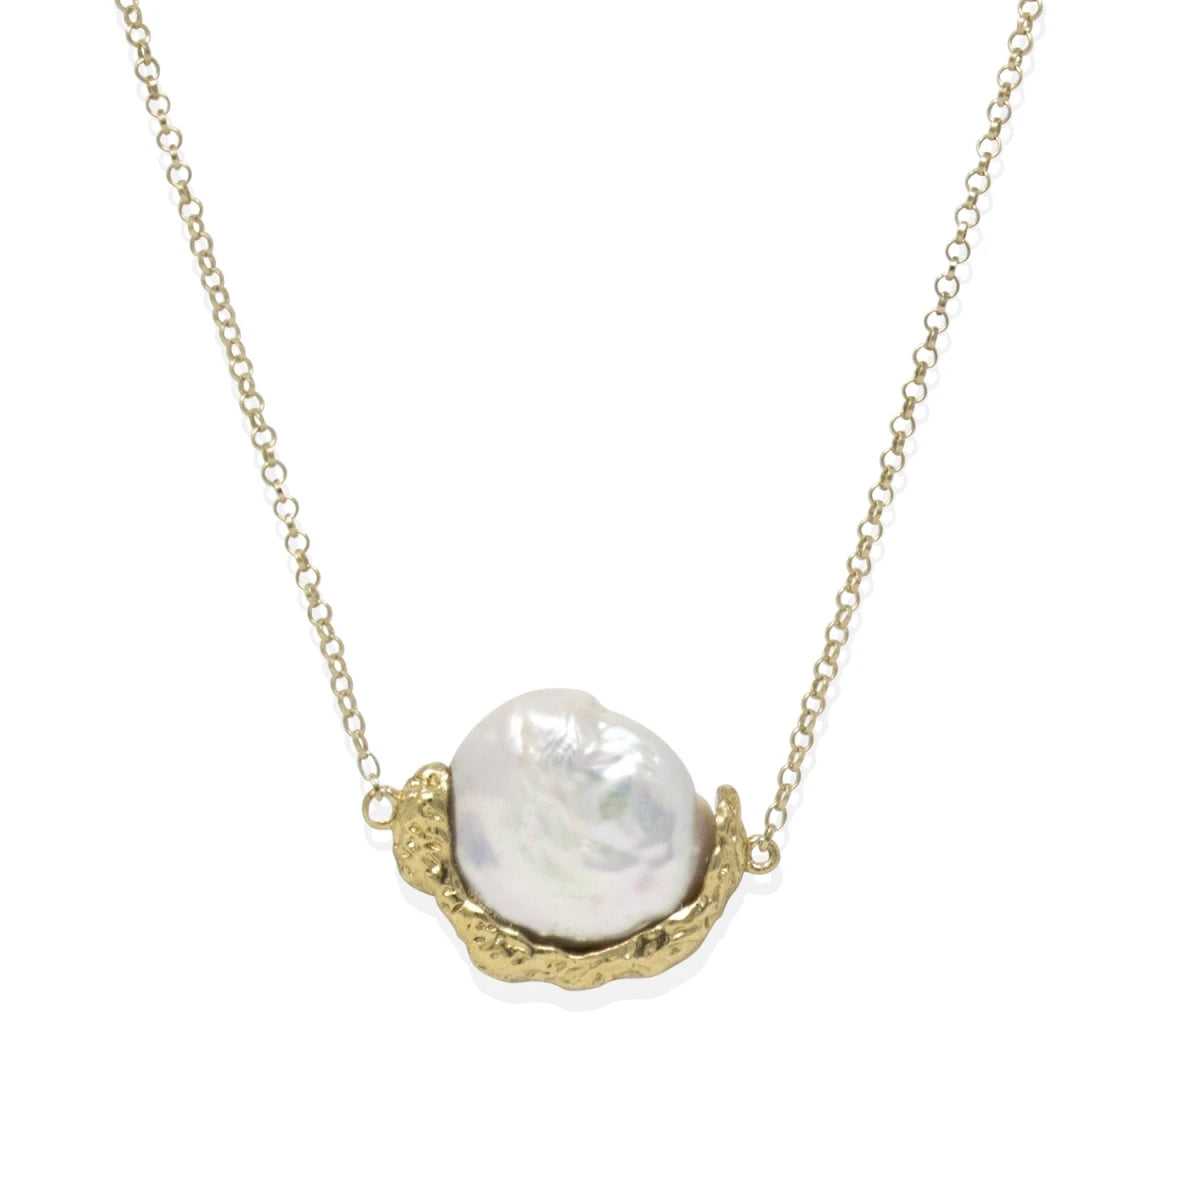 Ad Astra Gold-Plated Pearl Necklace